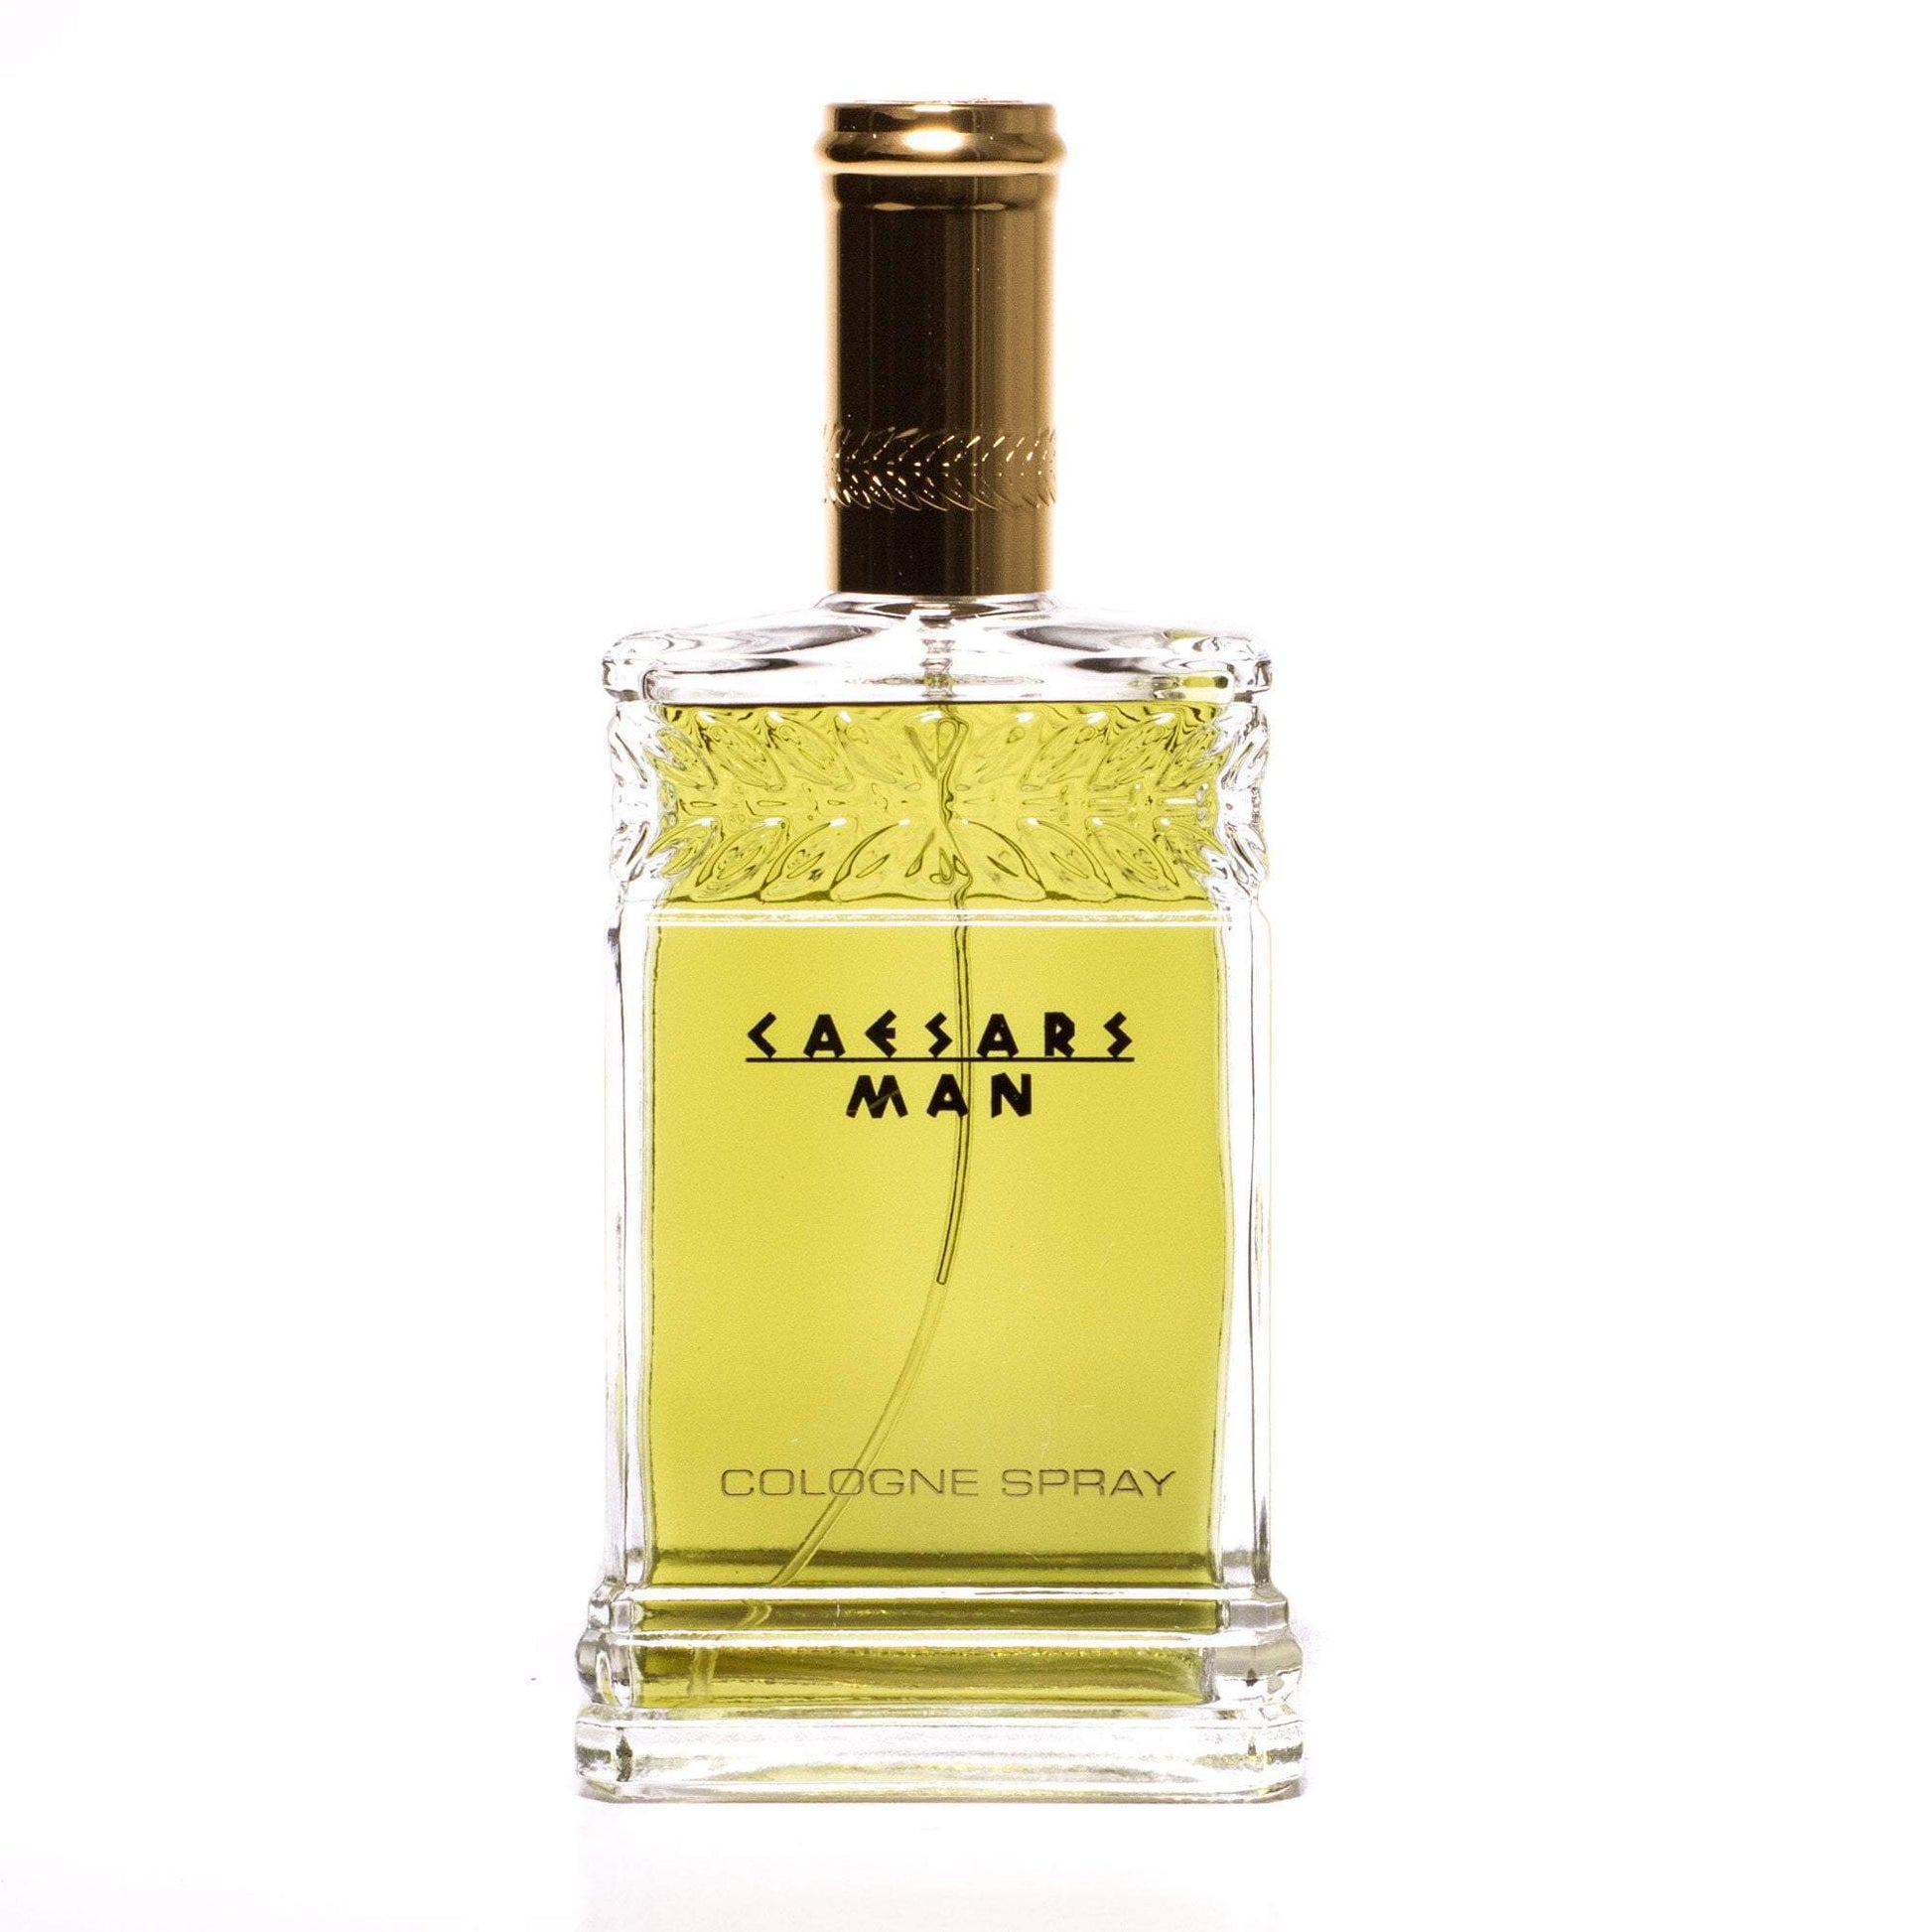 Caesar's Man Cologne Spray for Men by Caesar's, Product image 2